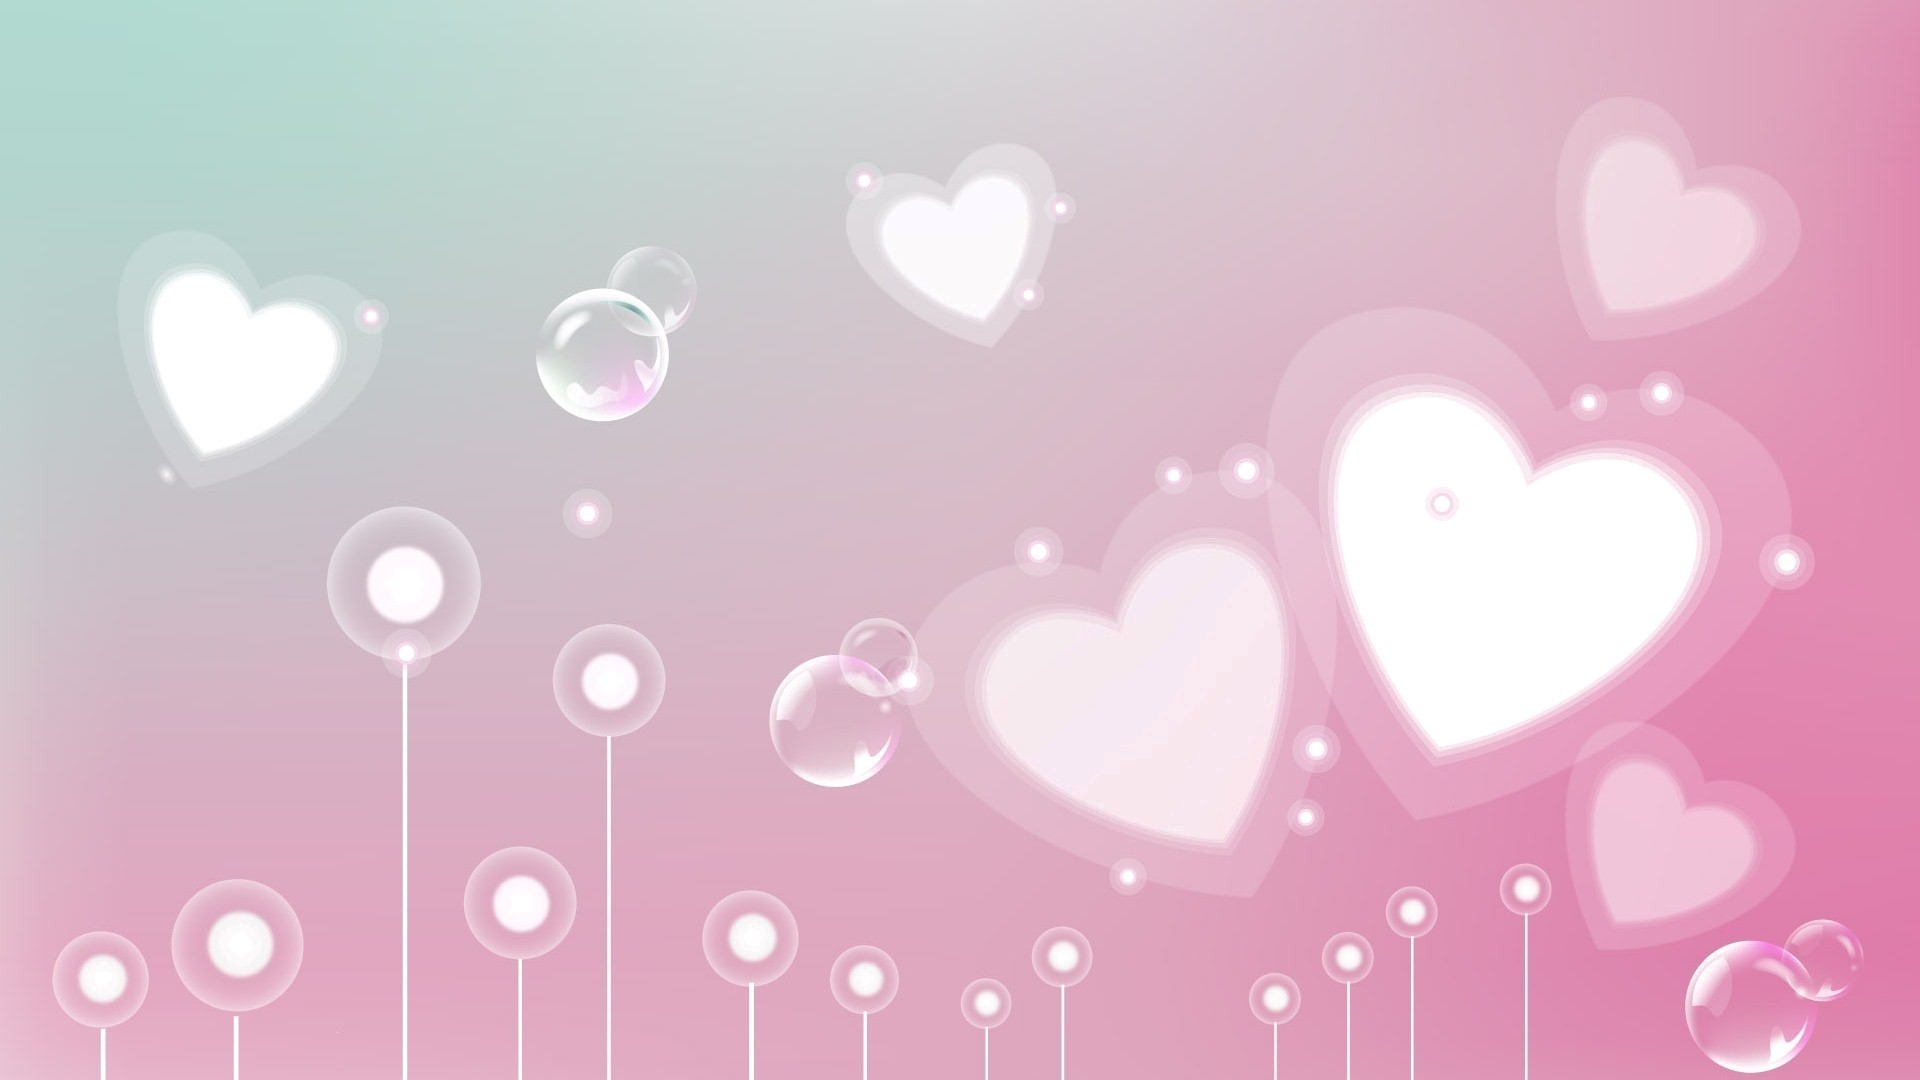 Background Growing Hearts Images There Valentine Wallpaer Wallpaper Wallpapers 1920x1080